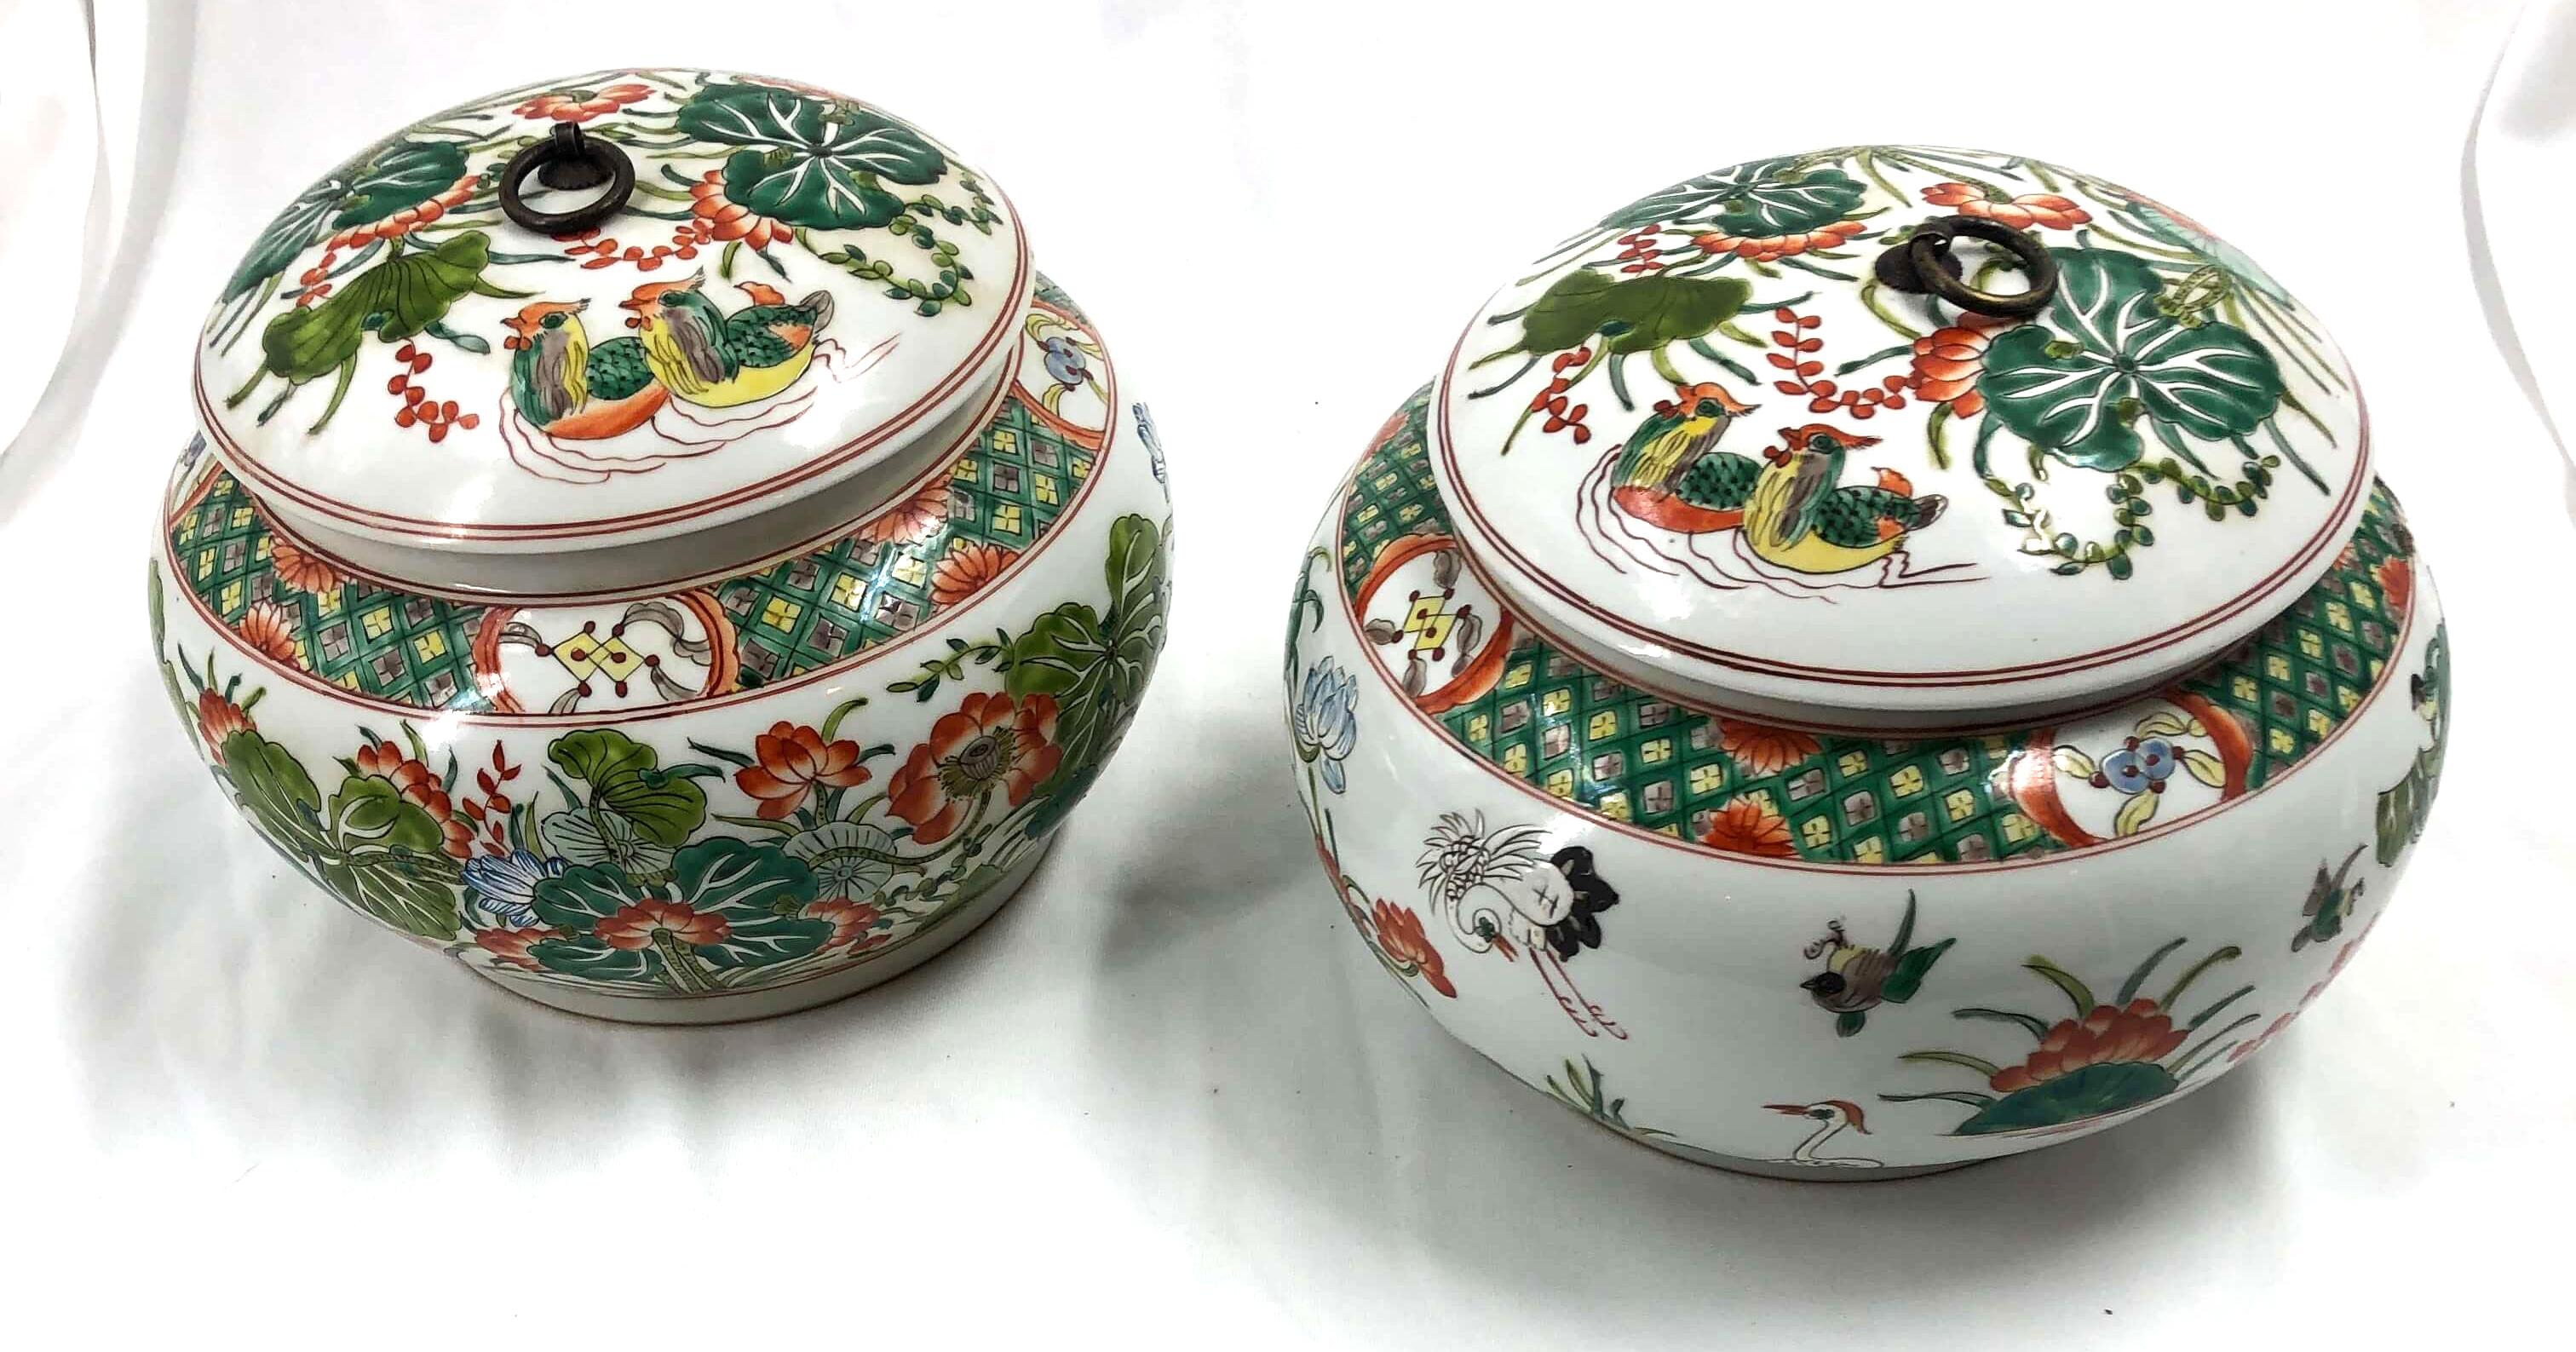 Pair of Chinese export Famille Verte round covered vases, hand painted and decorated with water scenes of grass, flowers, and fowl.